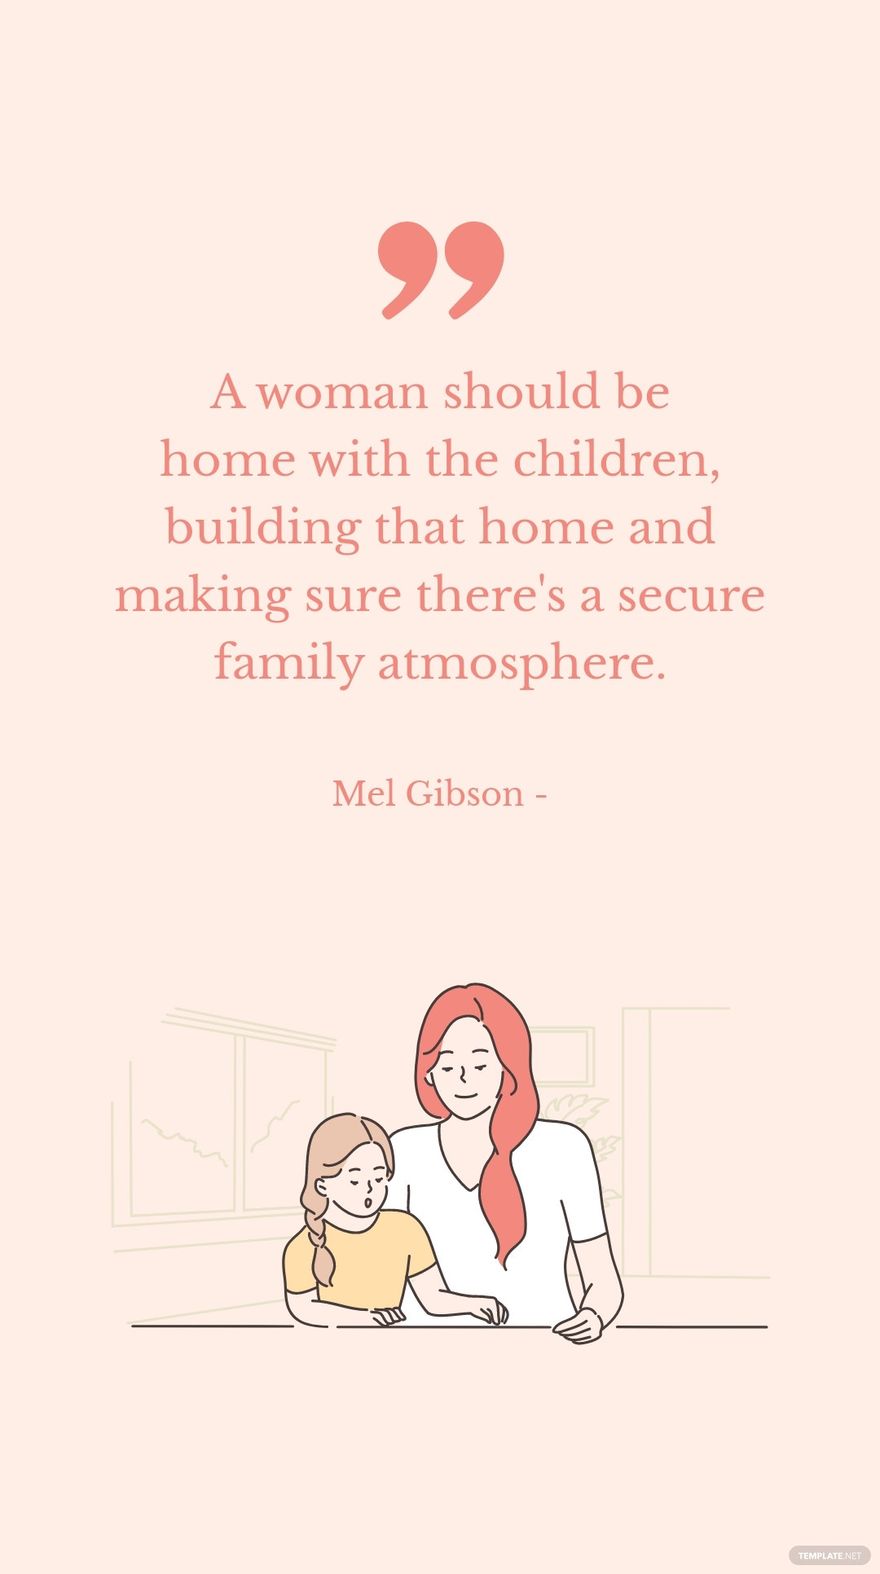 Free Mel Gibson - A woman should be home with the children, building that home and making sure there's a secure family atmosphere. in JPG